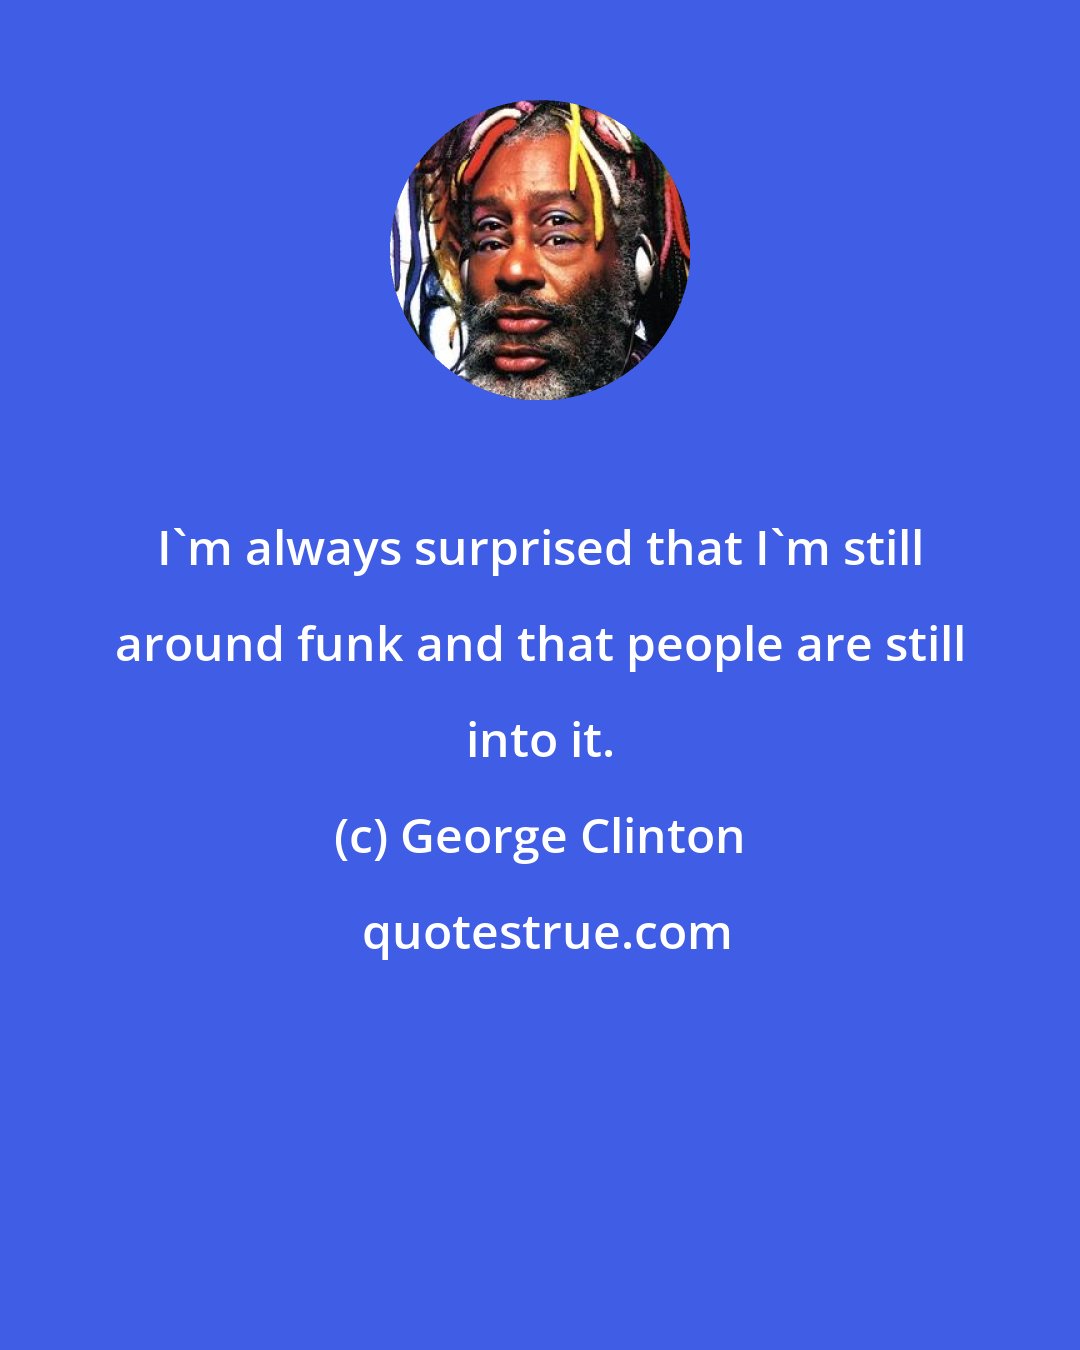 George Clinton: I'm always surprised that I'm still around funk and that people are still into it.